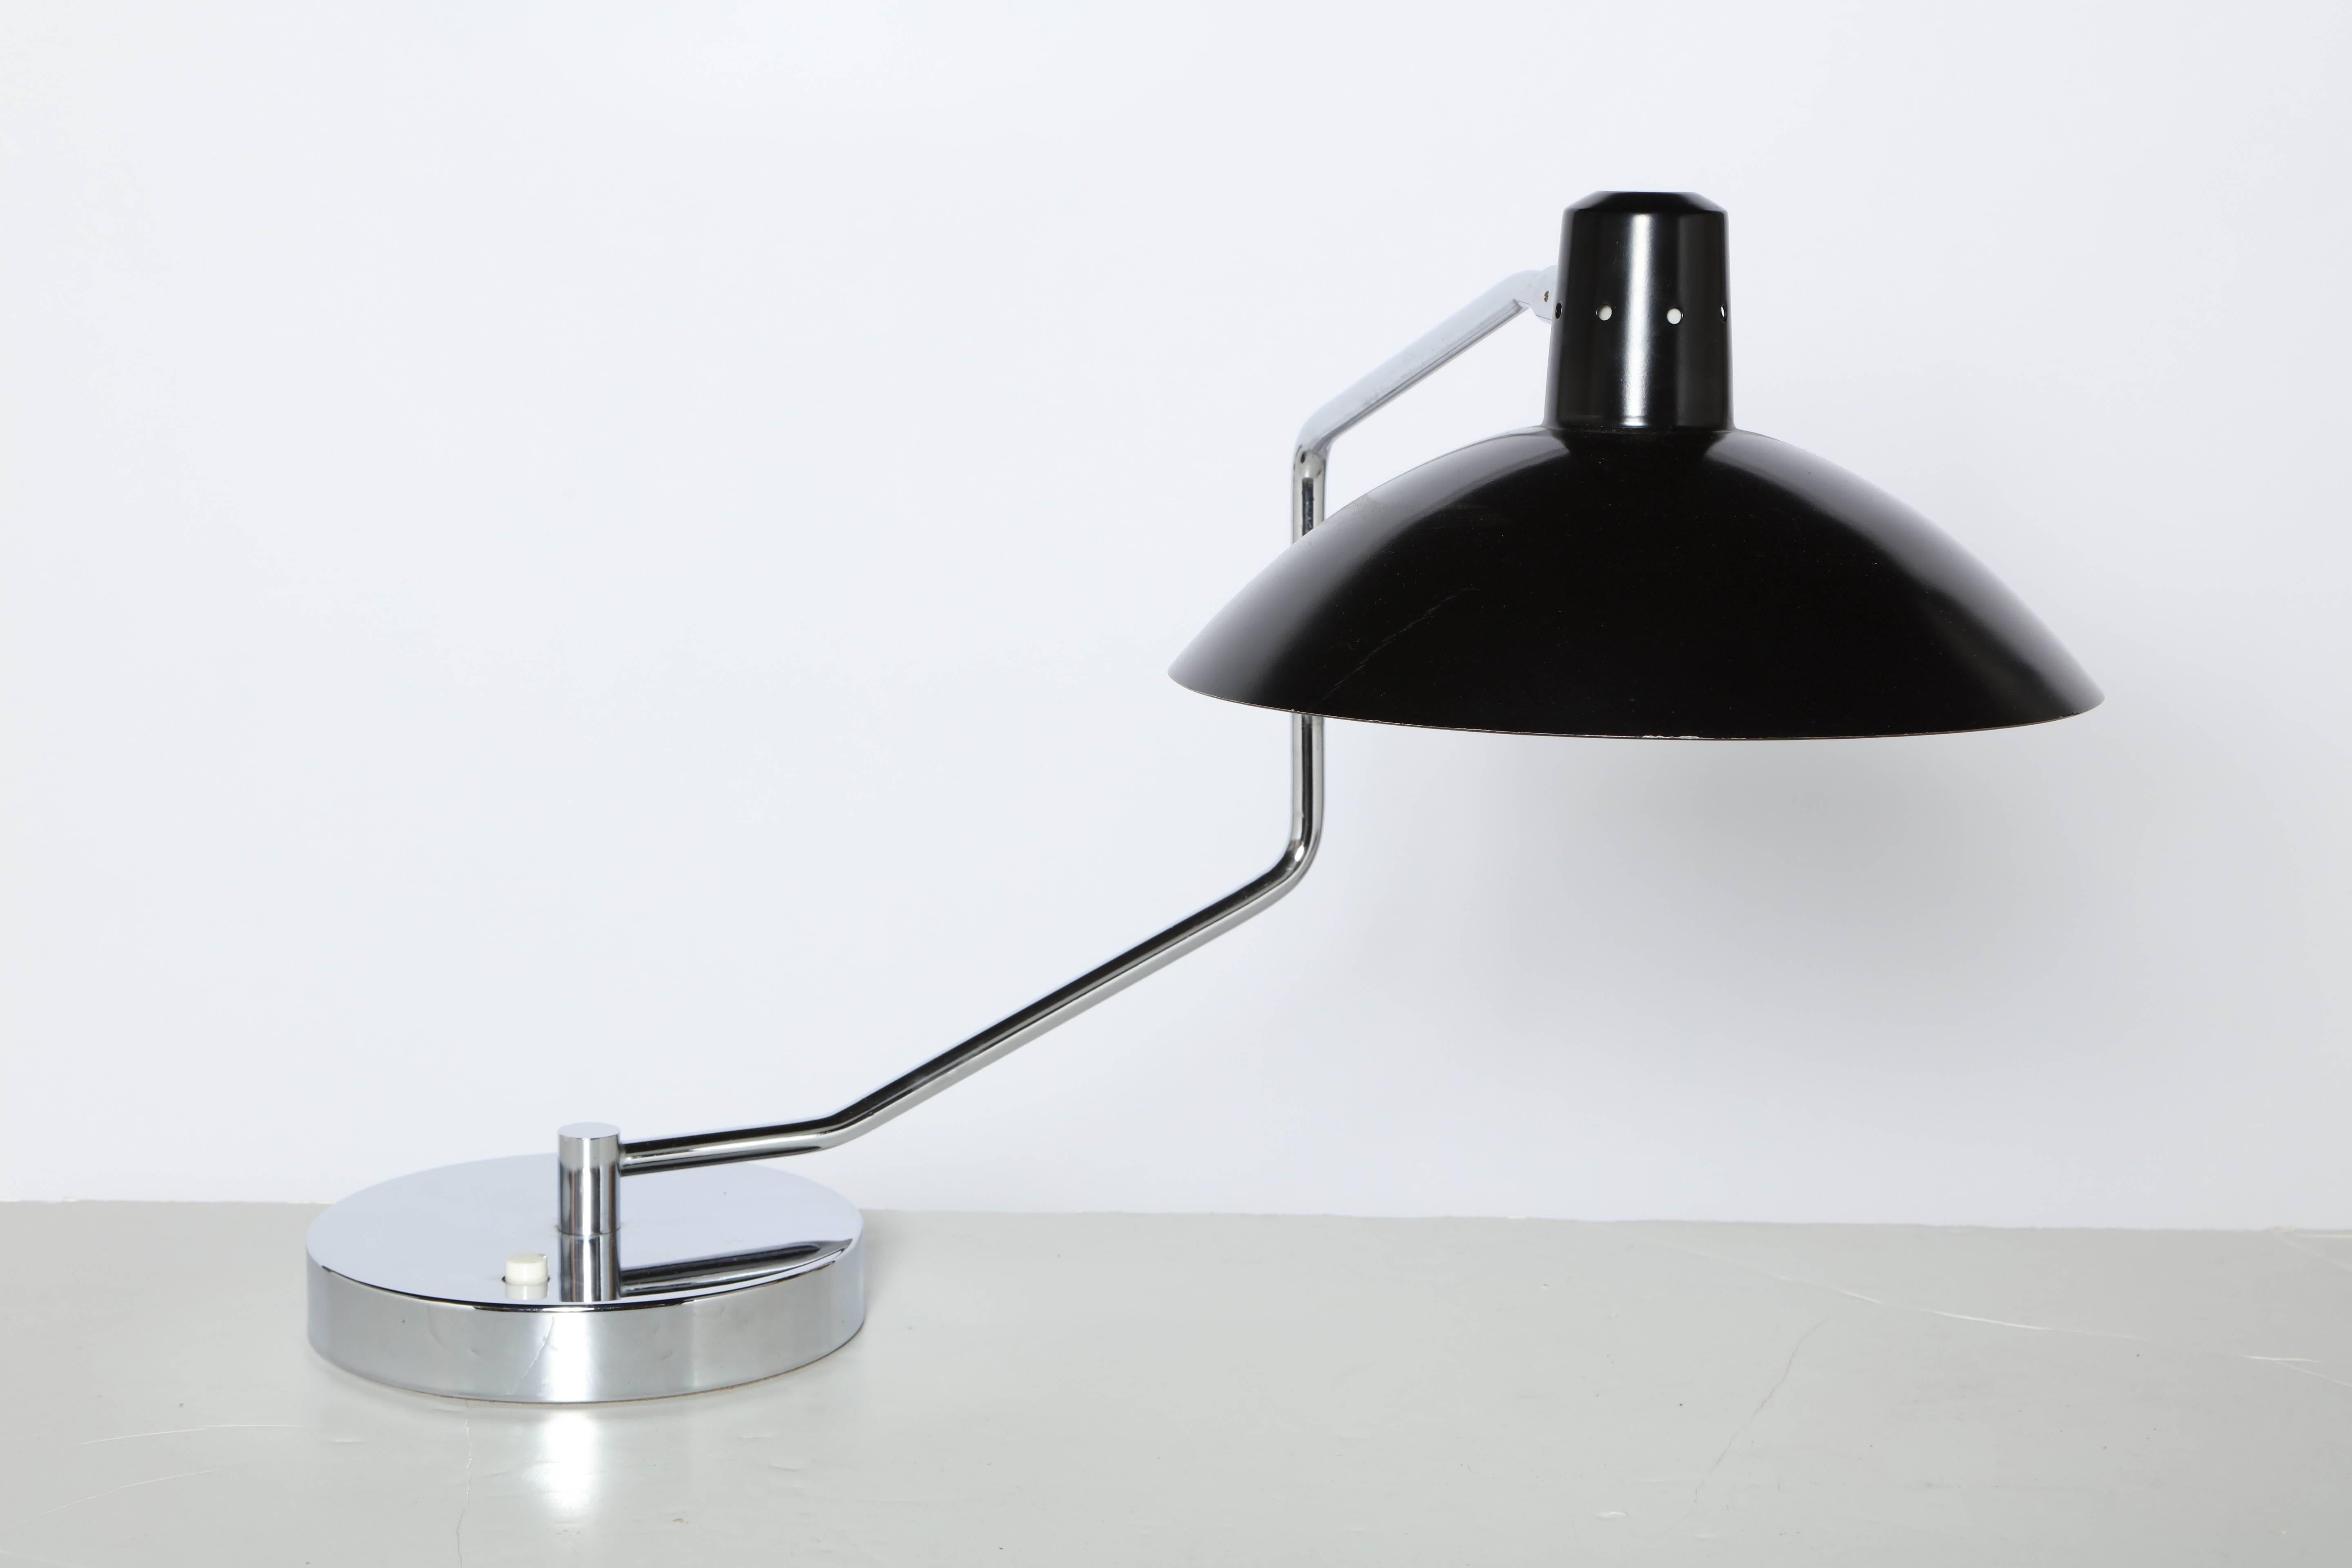 Streamlined Moderne Clay Michie for Knoll No. 8 Swing Arm Chrome Desk Lamp with Black Shade